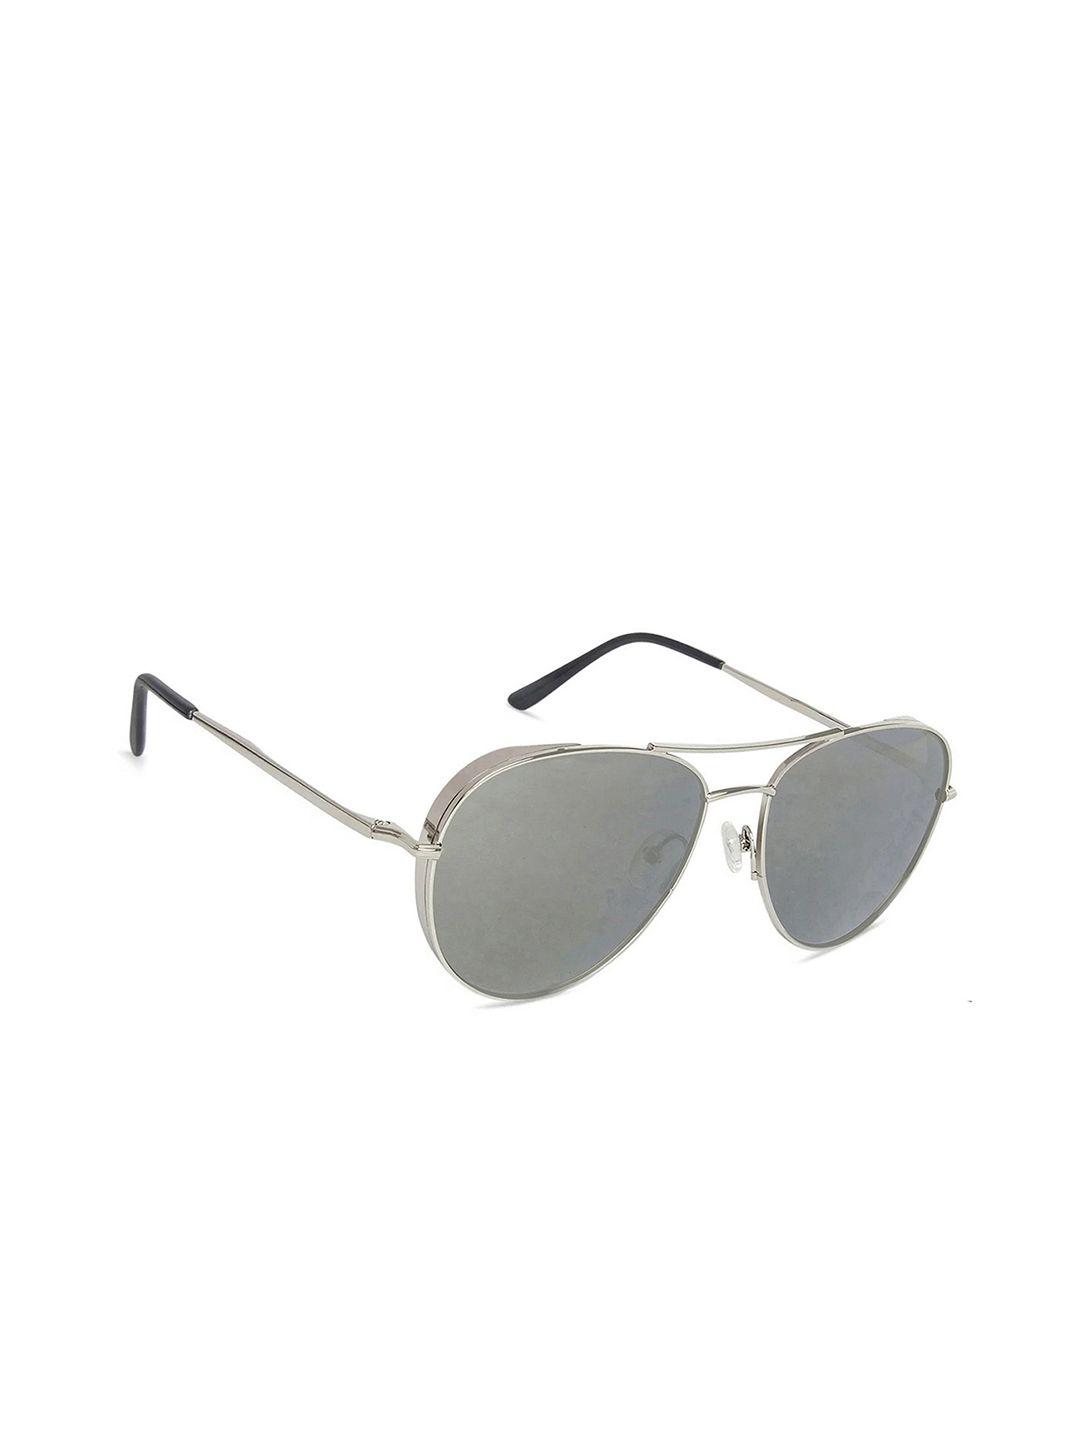 john jacobs unisex grey lens & silver-toned aviator sunglasses with polarised and uv protected lens